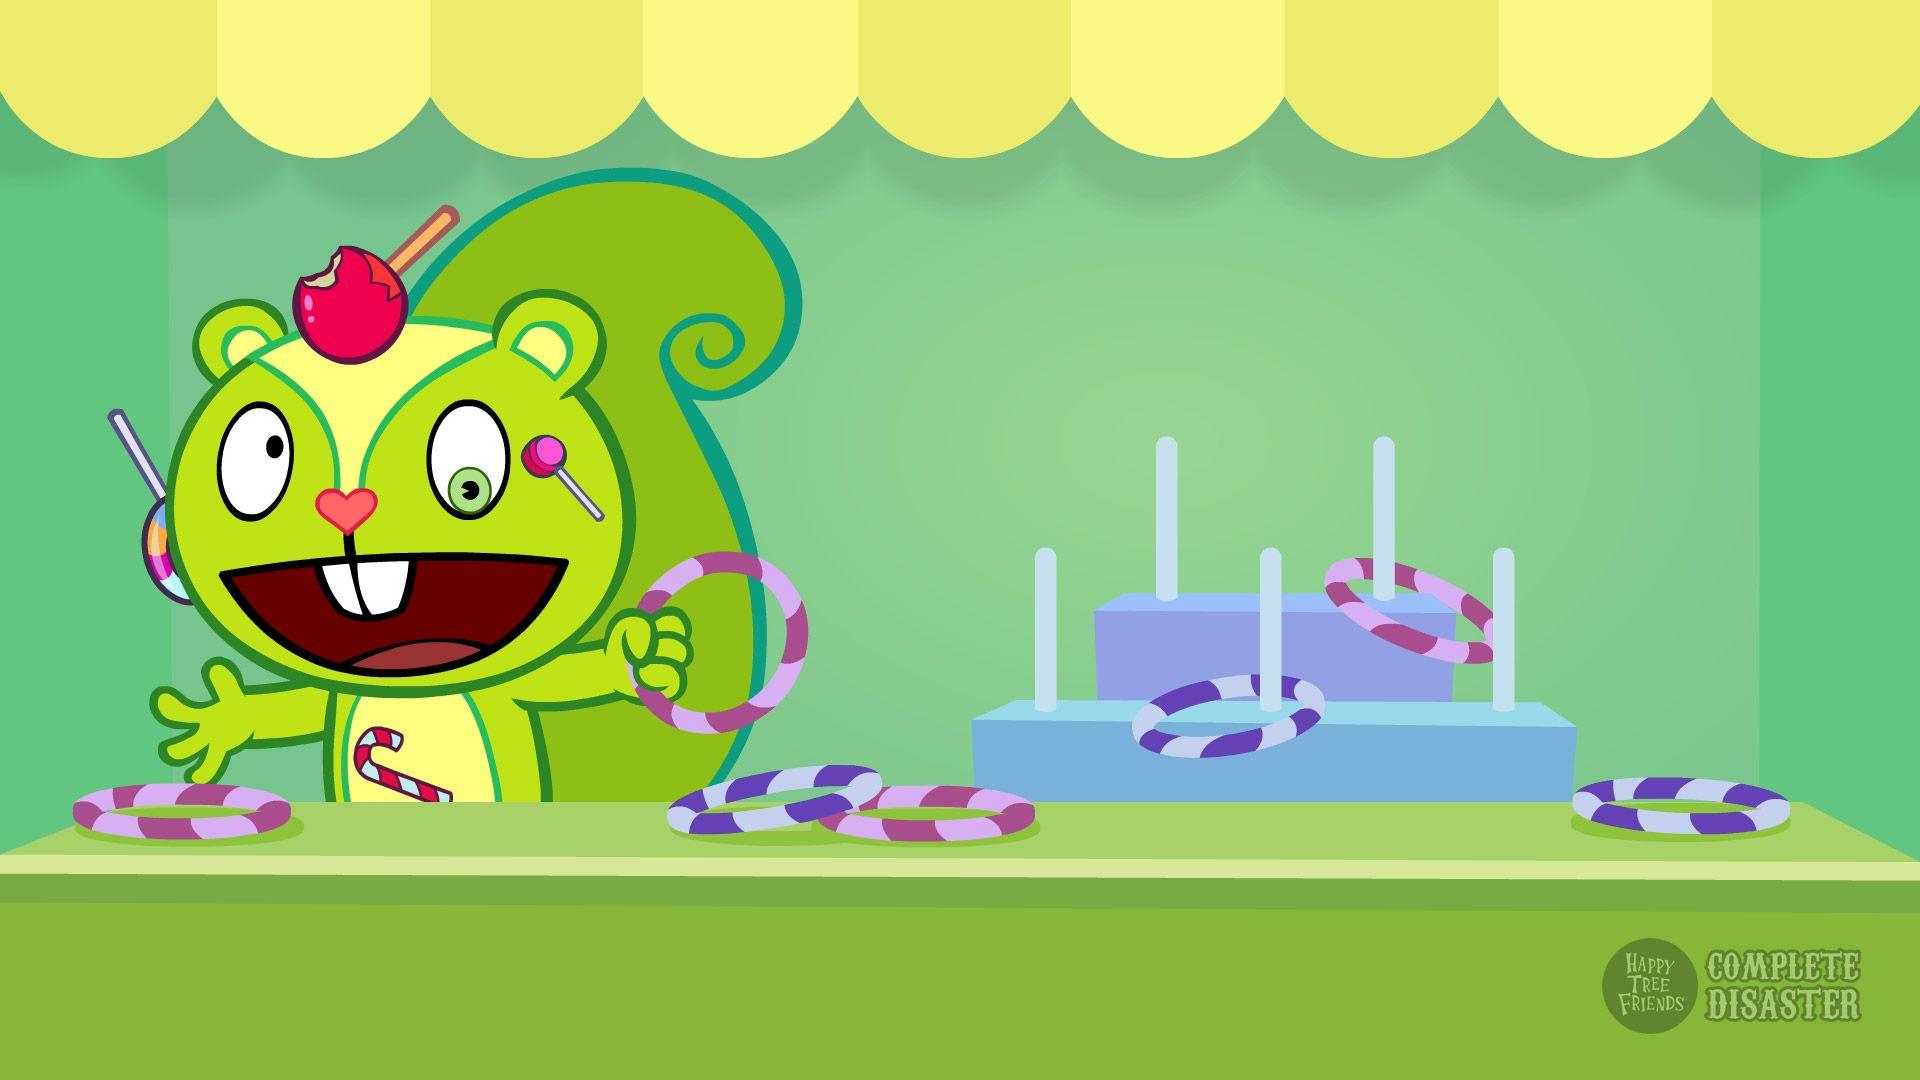 Happy Tree Friends: MORE Complete Disaster Wallpaper Tree